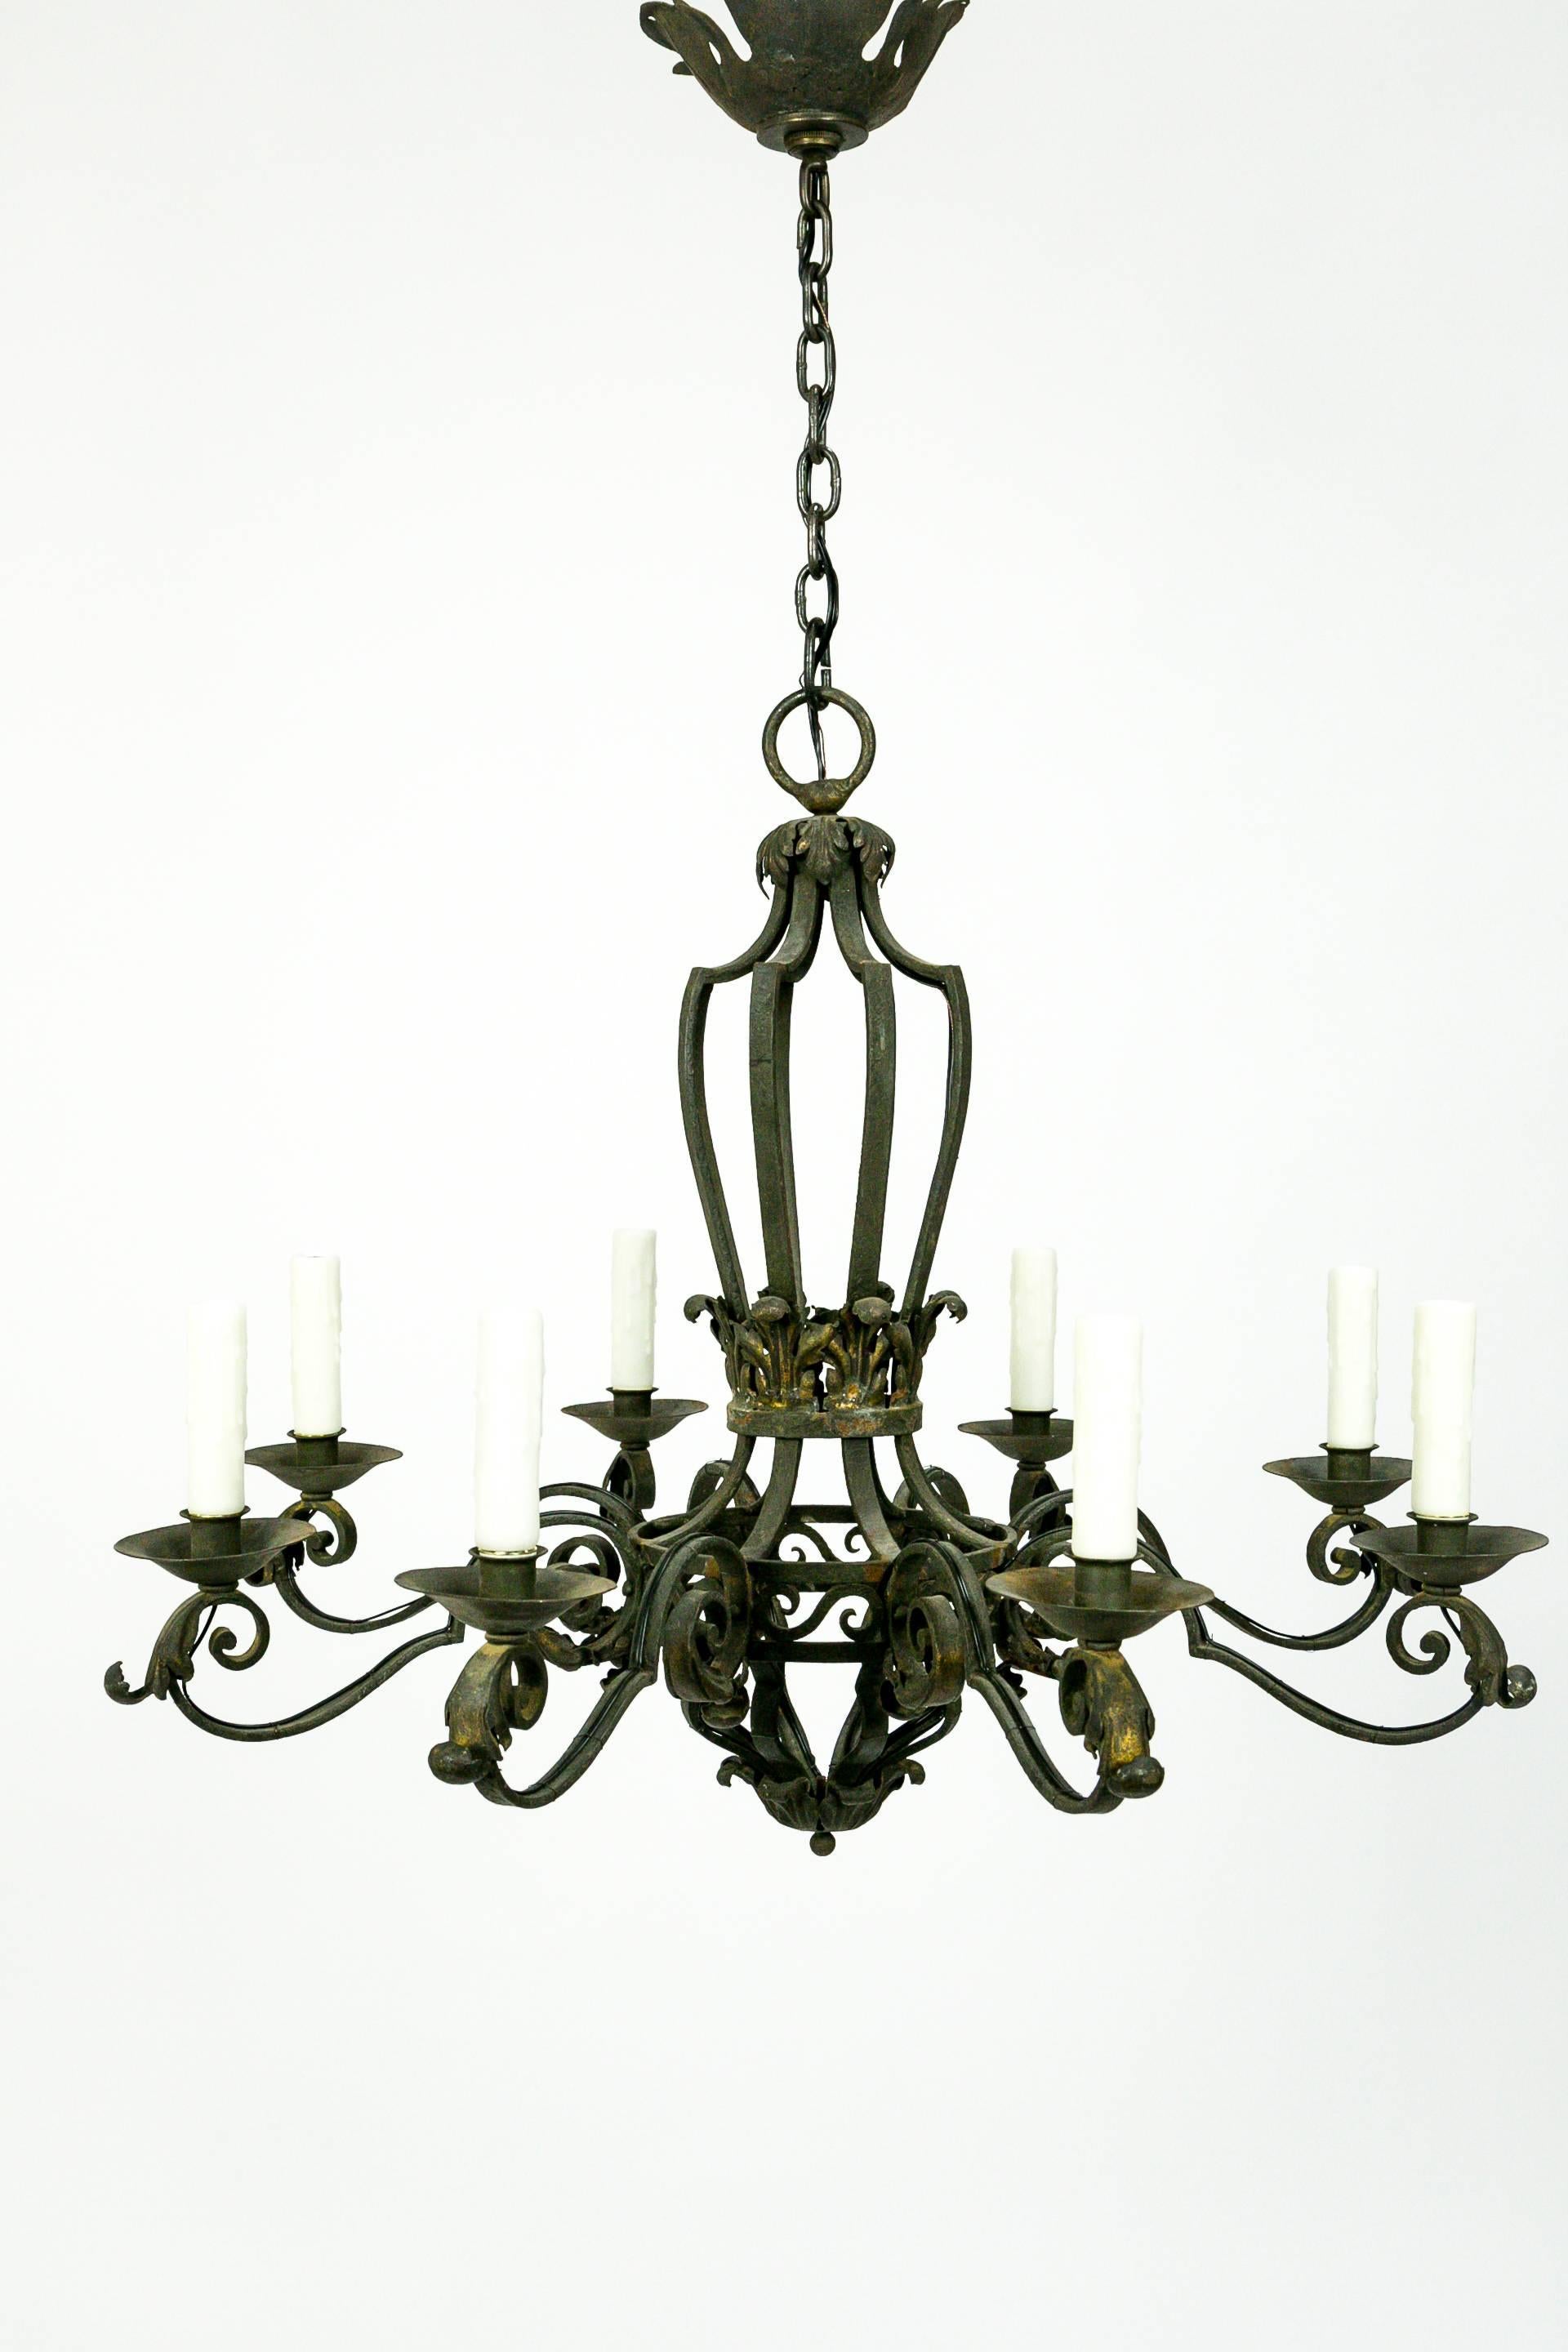 Gothic Revival French Hand-Forged Iron Chandelier